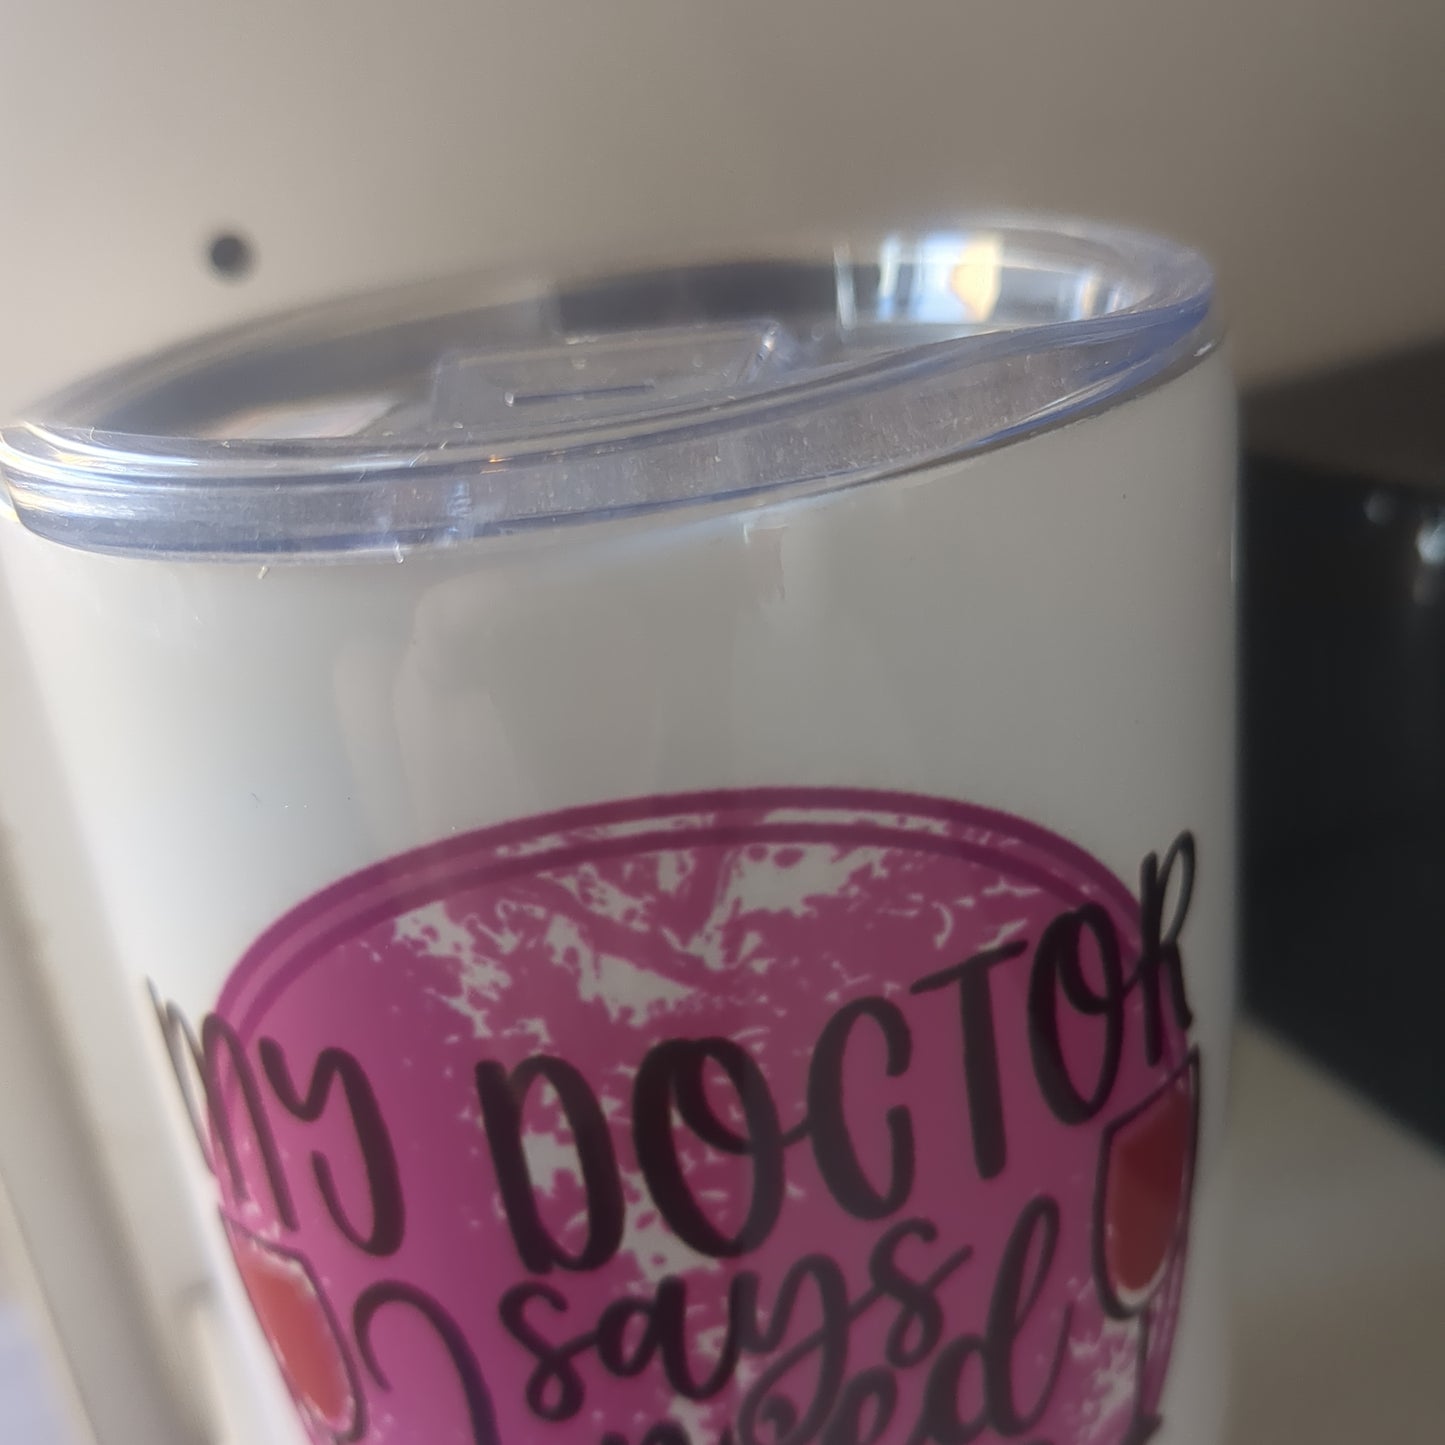 12 Oz stainles steel wine tumbler My Doctor Says I Need Glasses